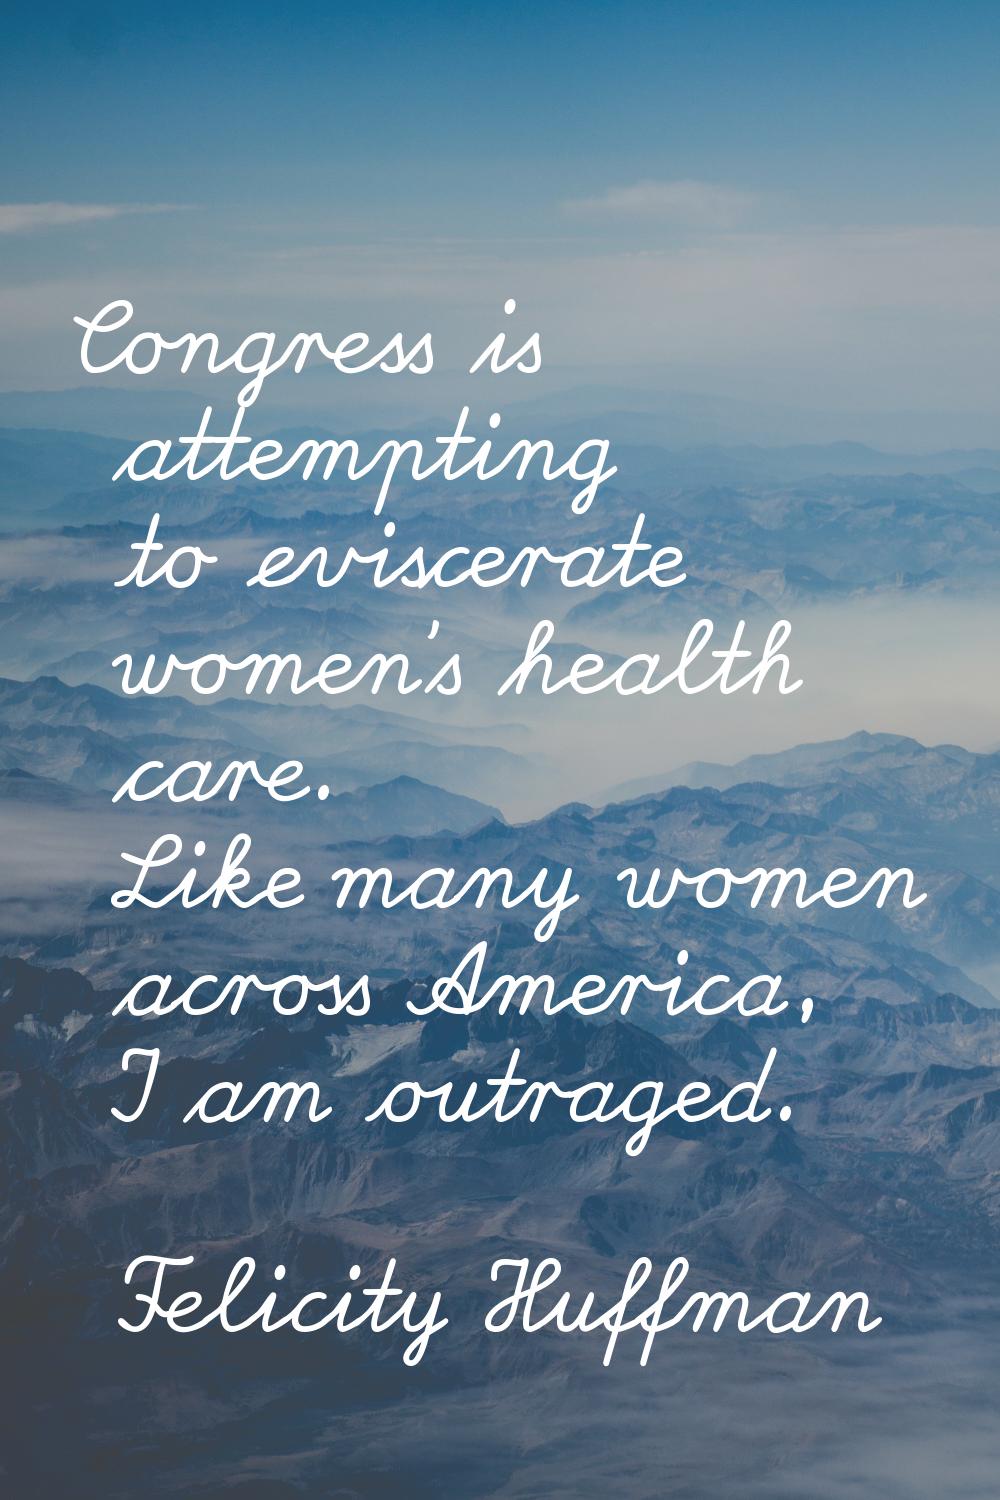 Congress is attempting to eviscerate women's health care. Like many women across America, I am outr